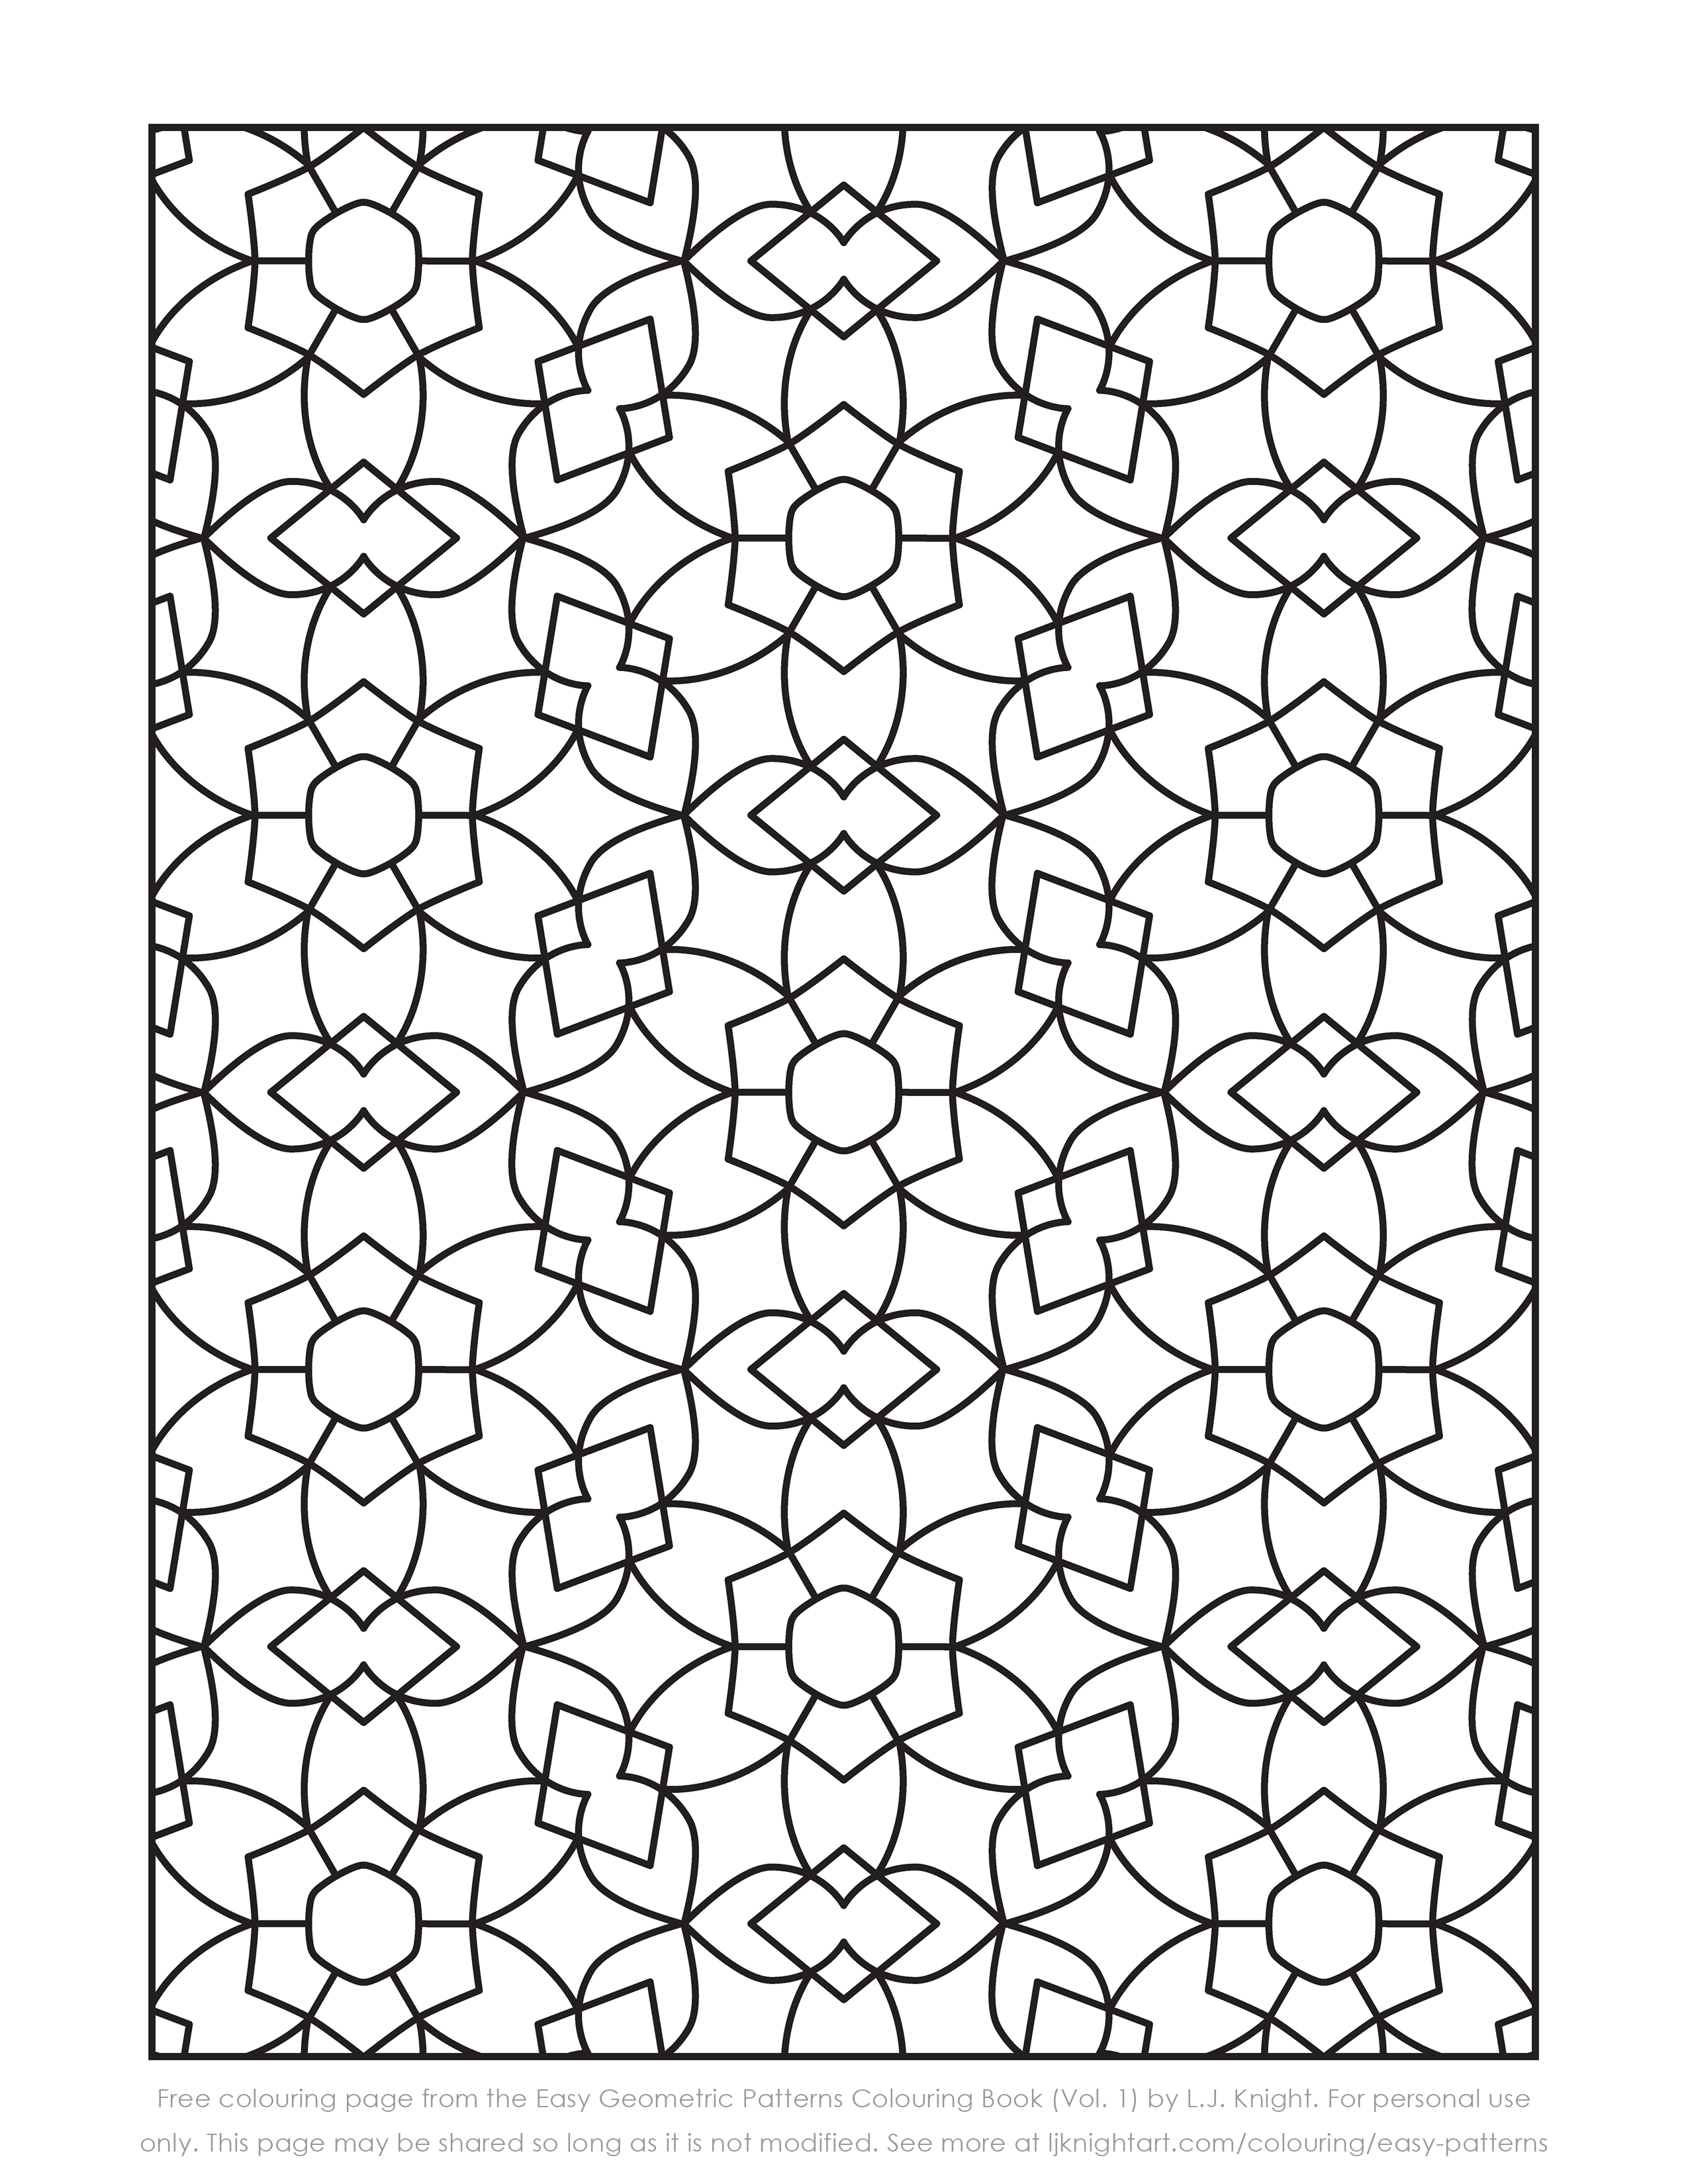 New – Easy Geometric Patterns Colouring Book (Volume 1)